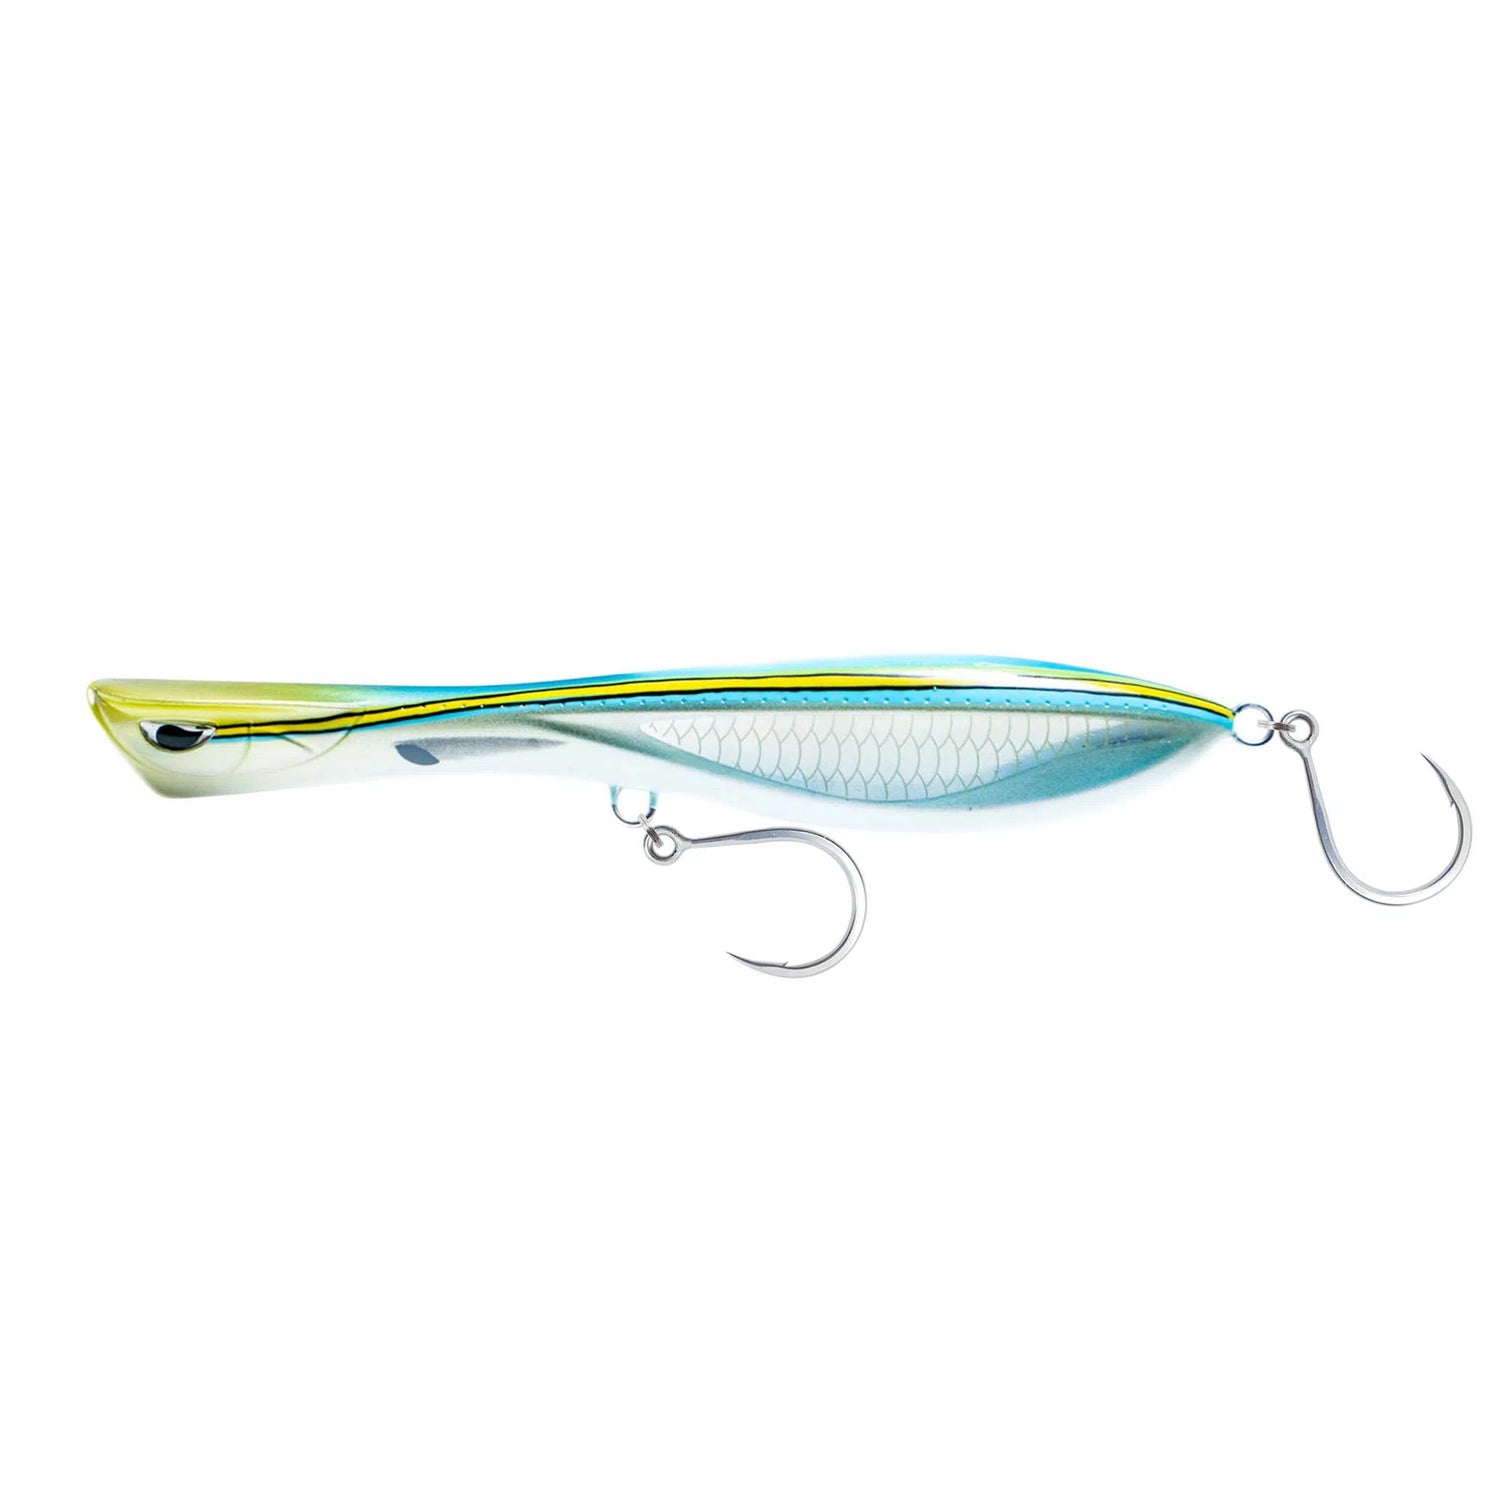 Nomad Dartwing Popper 165mm-Lure - Poppers, Stickbaits & Pencils-Nomad-Fusilier-Fishing Station